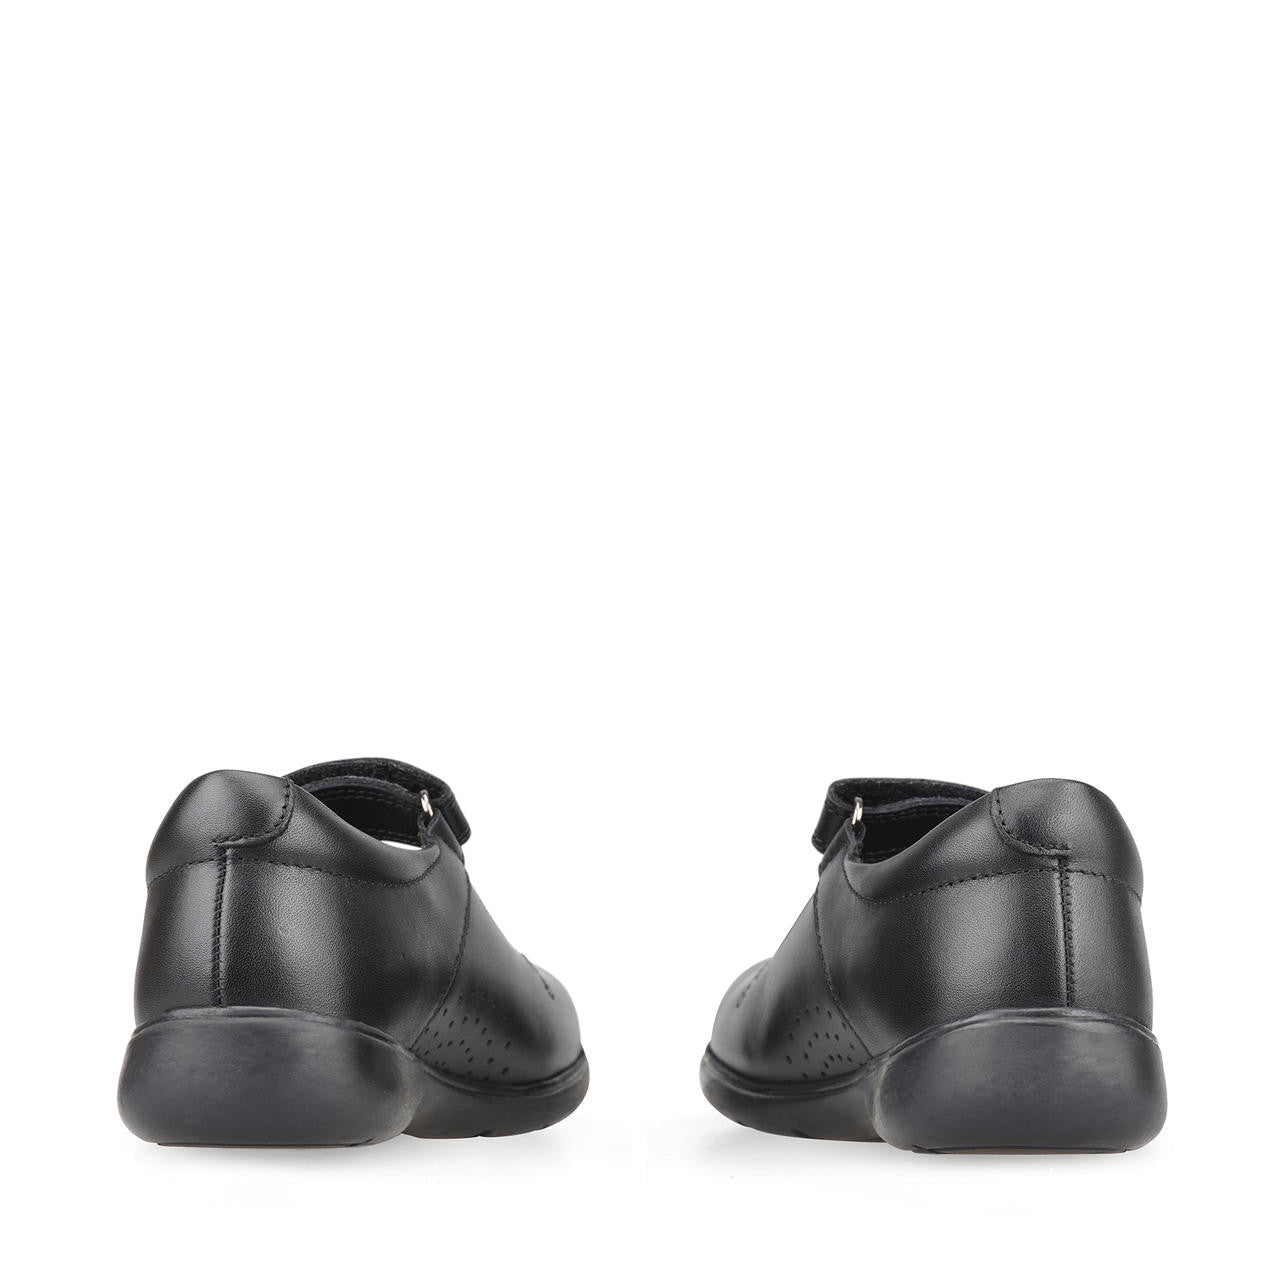 A pair of girls Mary Jane school shoes by Start Rite, style Wish, in black leather with flower motif and velcro fastening. View from back of shoes.